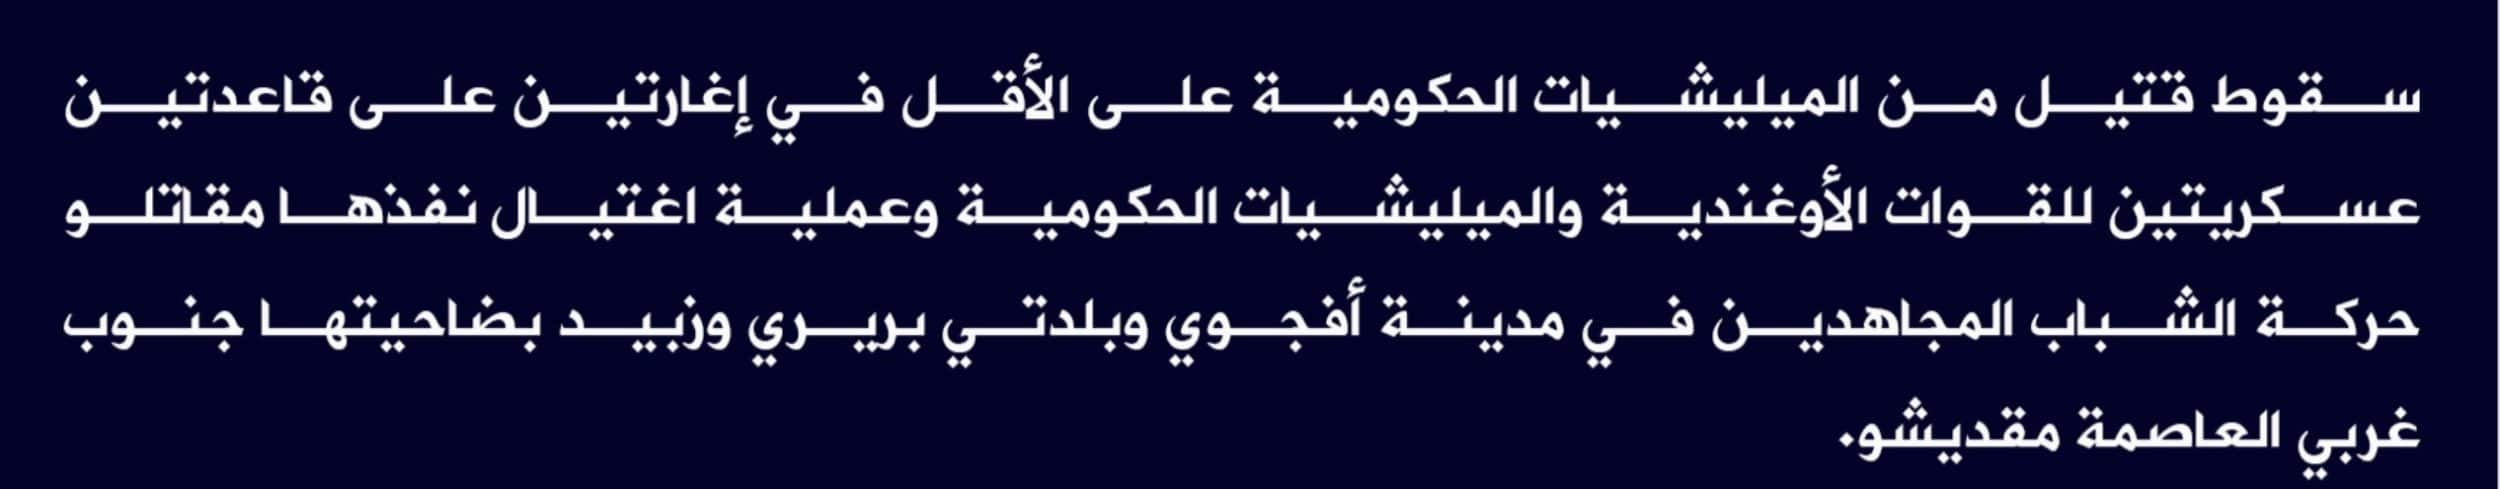 (Claim) al-Shabaab: A Somalian Forces Element Was Killed in Two Attacks on Ugandan and Somalian Military Bases and an Assassination Operation in Afgoyee City, Bariri and Zabid Towns, Southwest Somalia - 18 May 2022